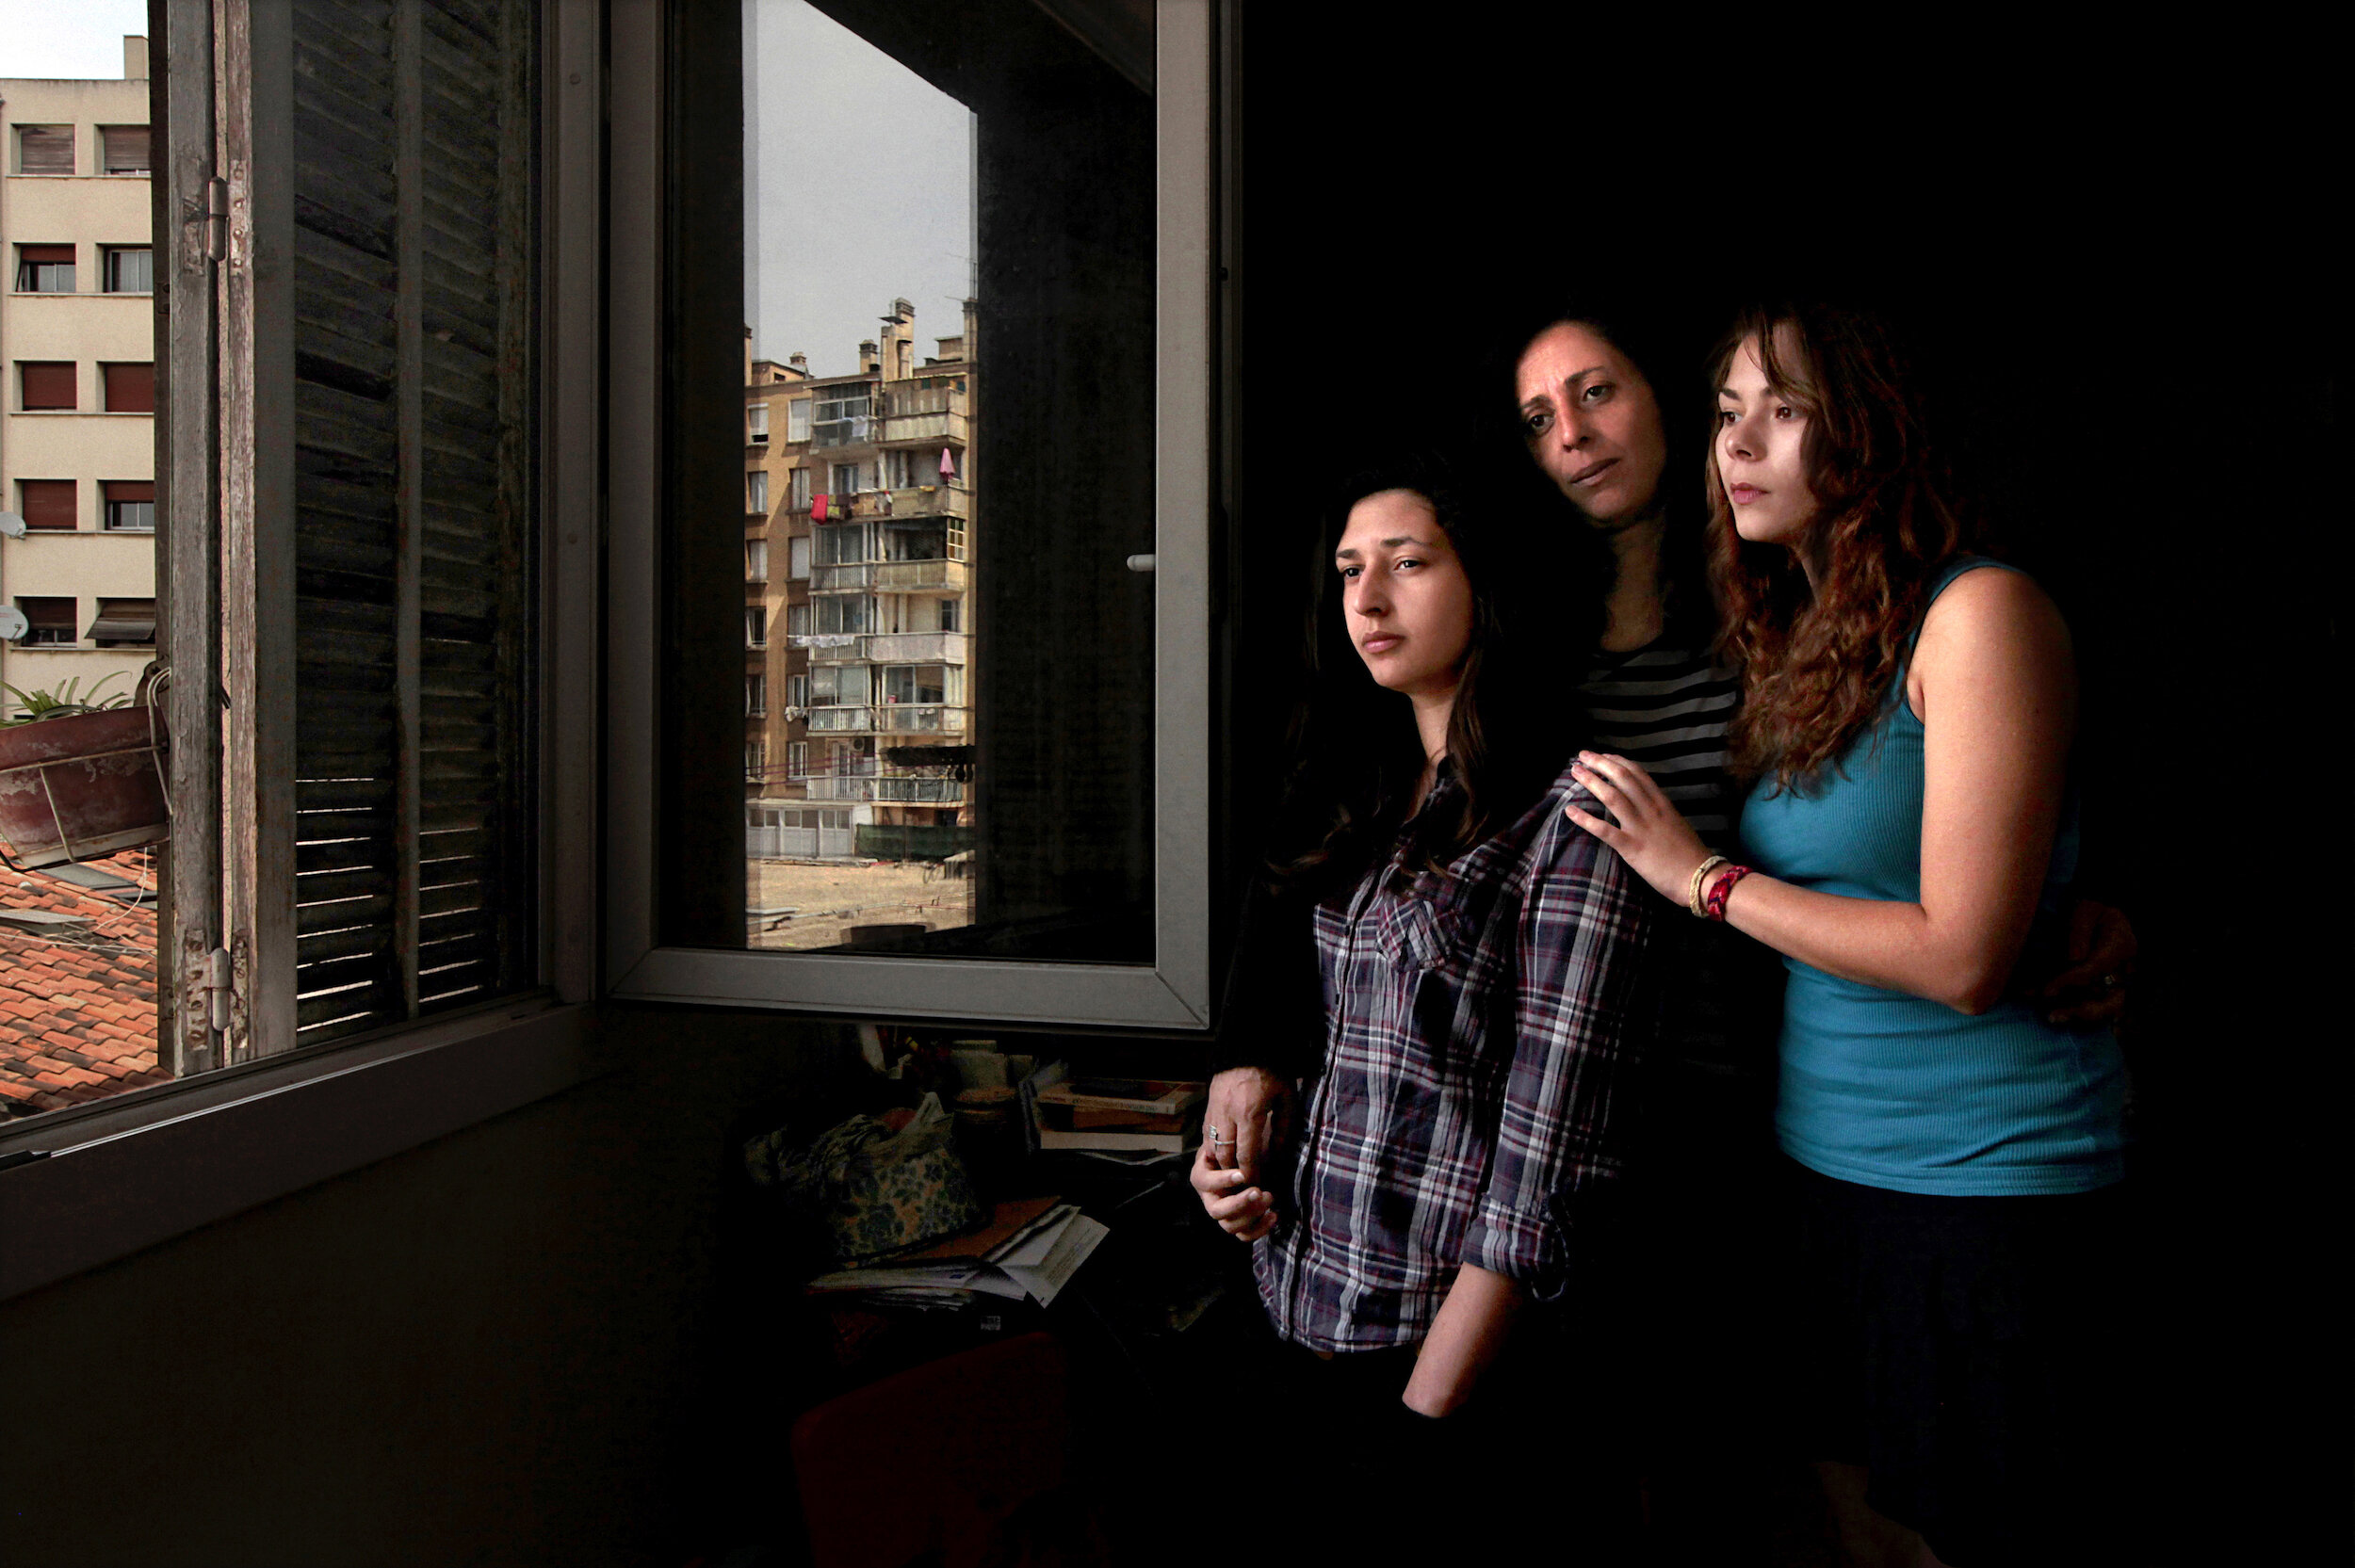     France. Marseille. 2014. Radia (center) with her daughter (left) and her friend (right) at her home in the 3rd arrondissement of Marseille.        